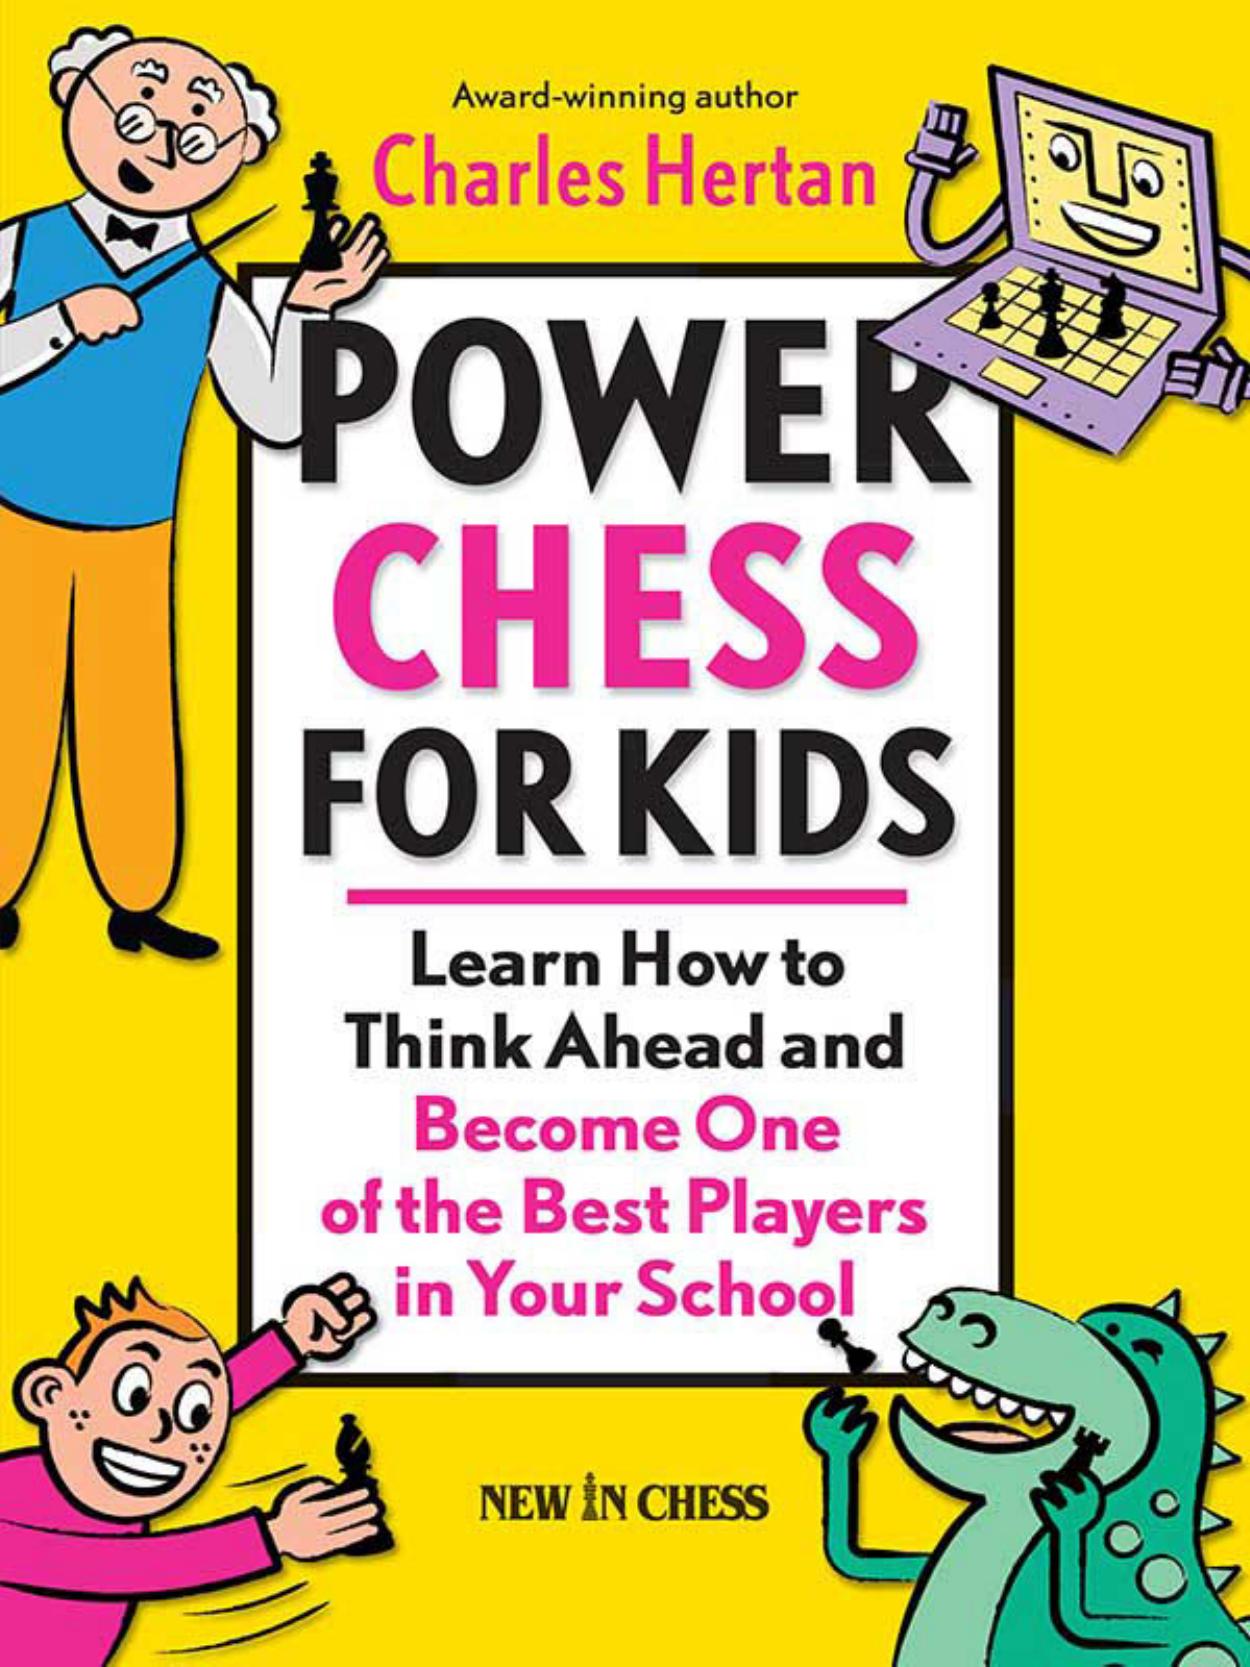 Power Chess for Kids: More Ways to Think Ahead and Become One of the Best Players in Your School by Charles Hertan